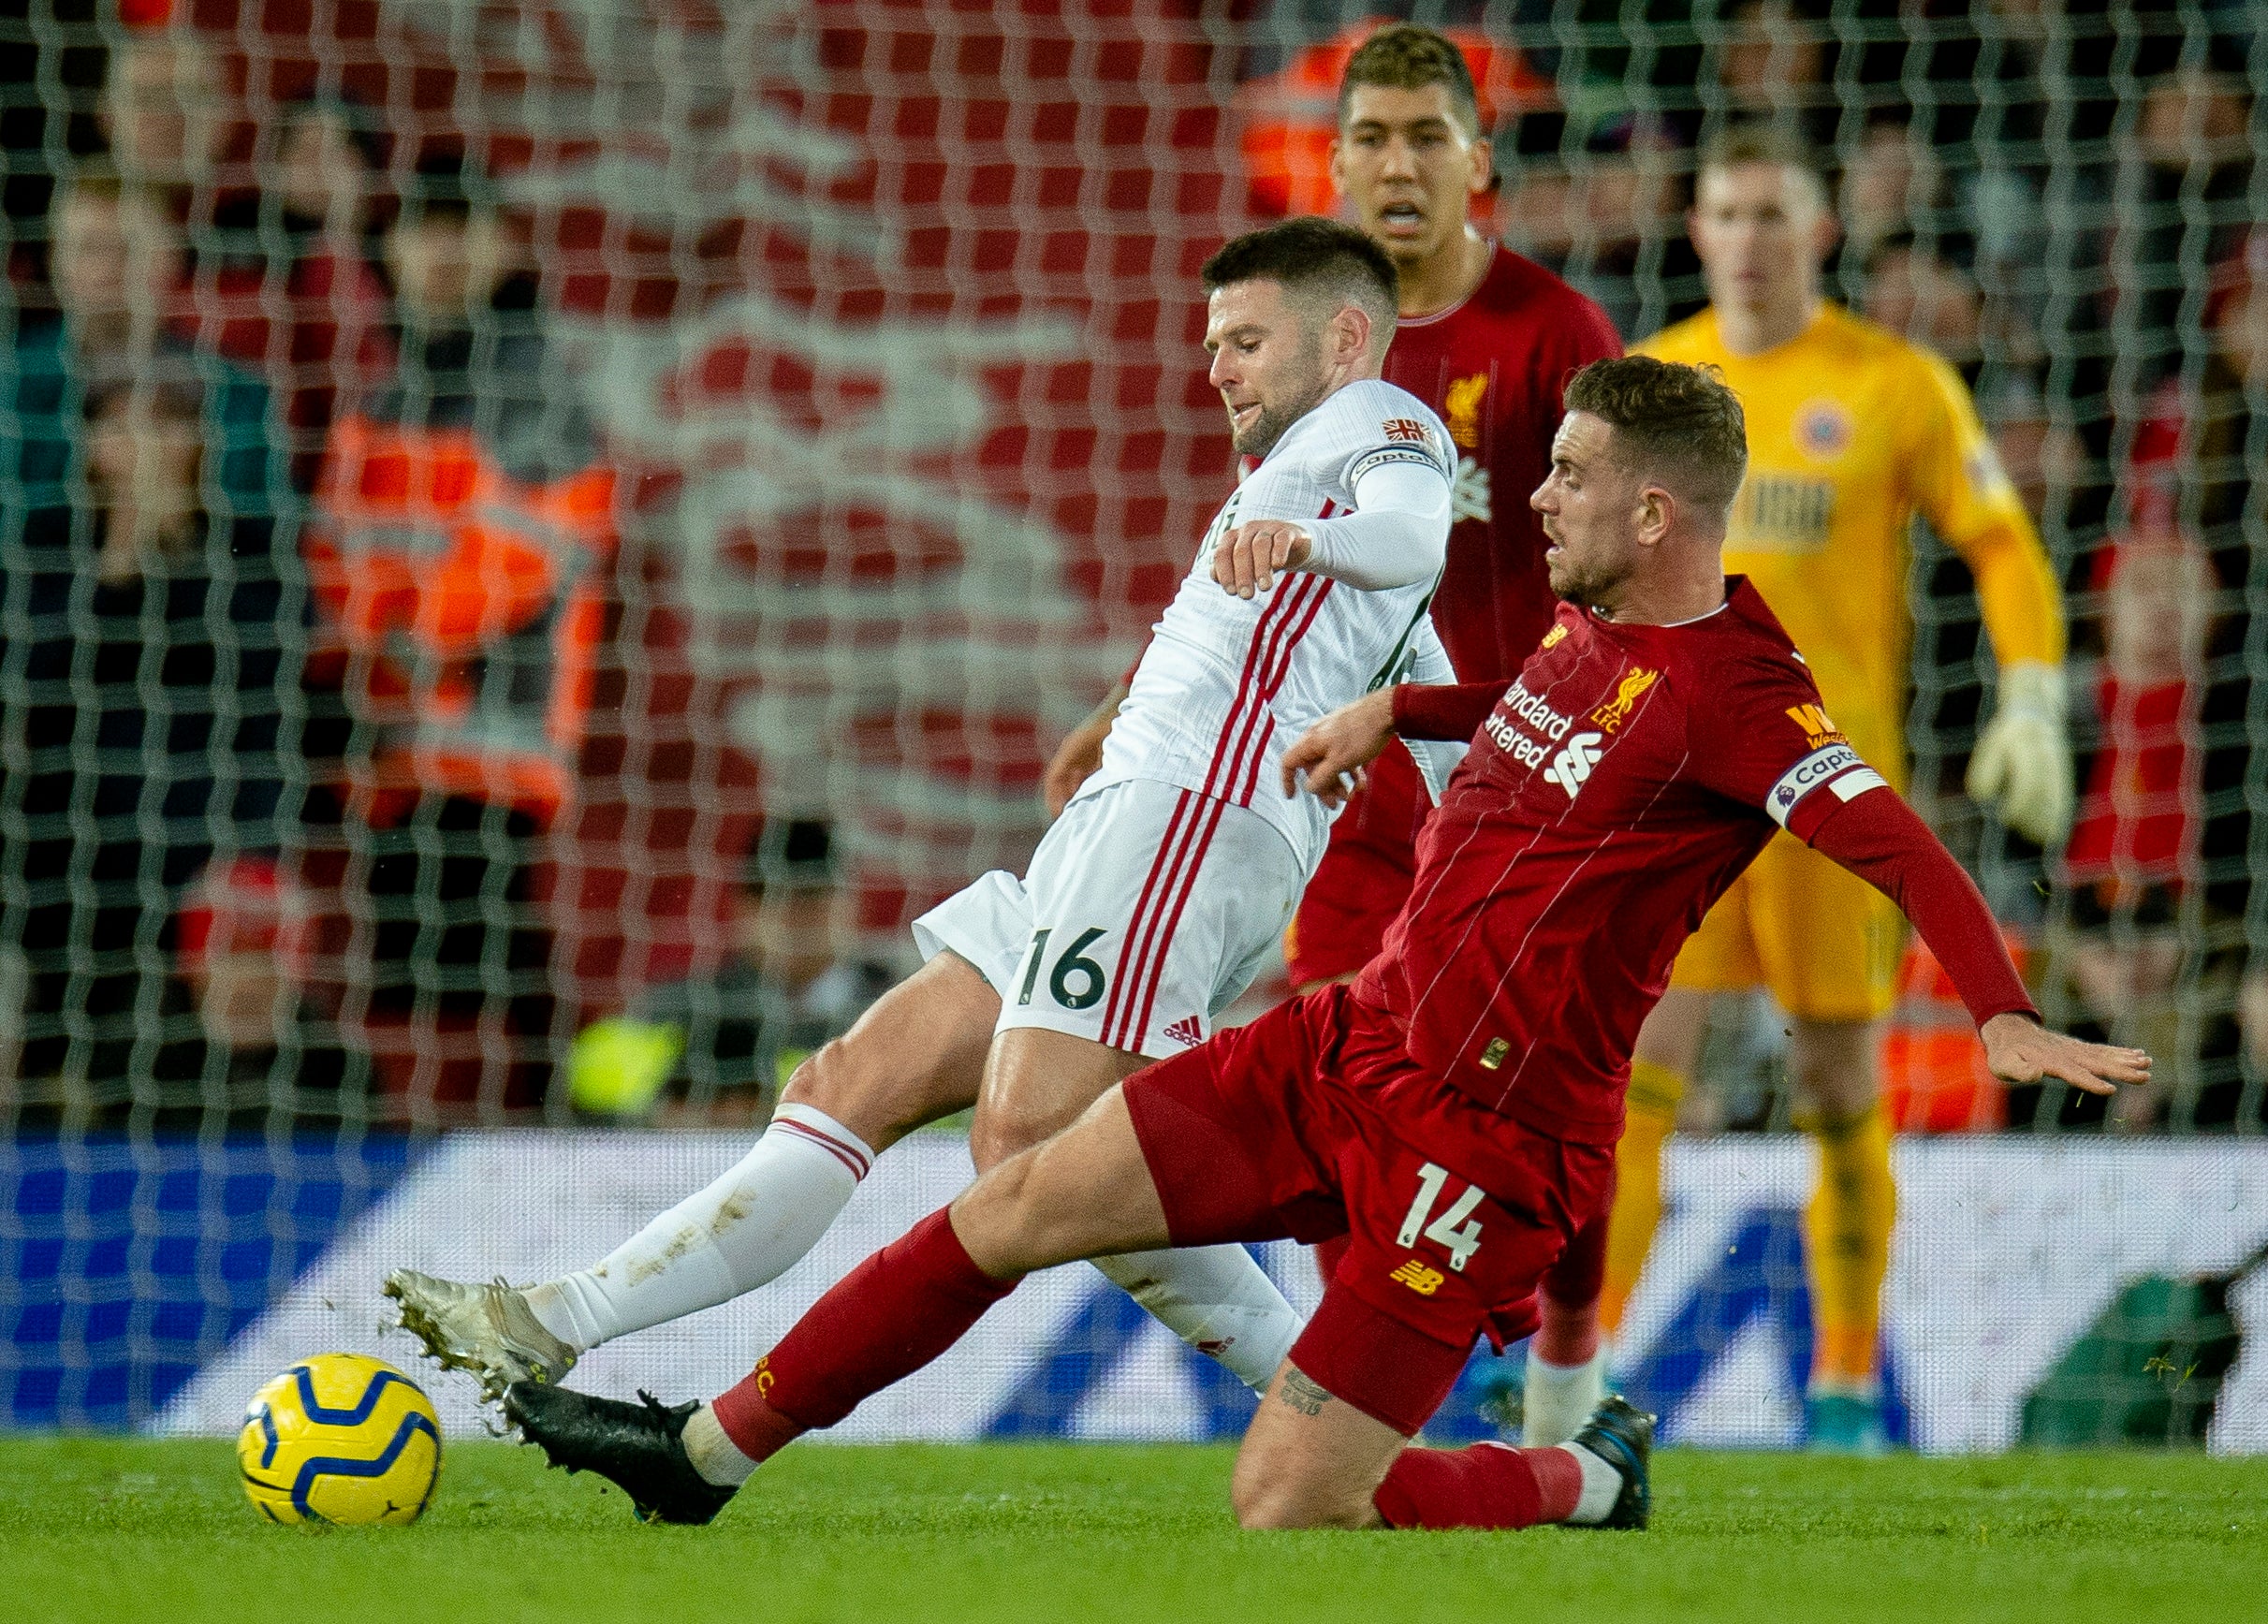 Henderson has excelled in the No 6 role since Fabinho's injury